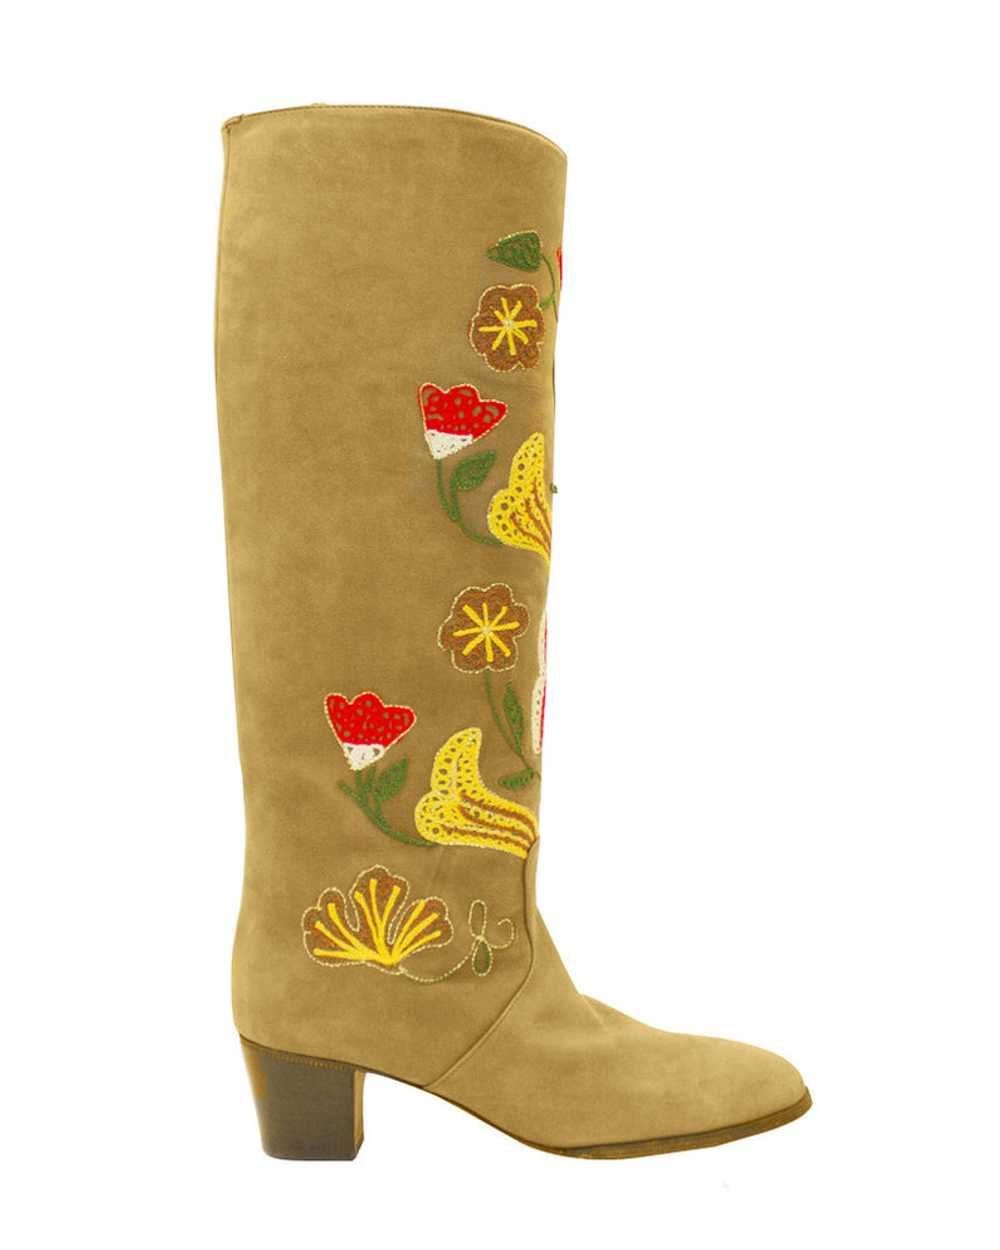 Tan Suede Floral Embroidery Boots - image 3